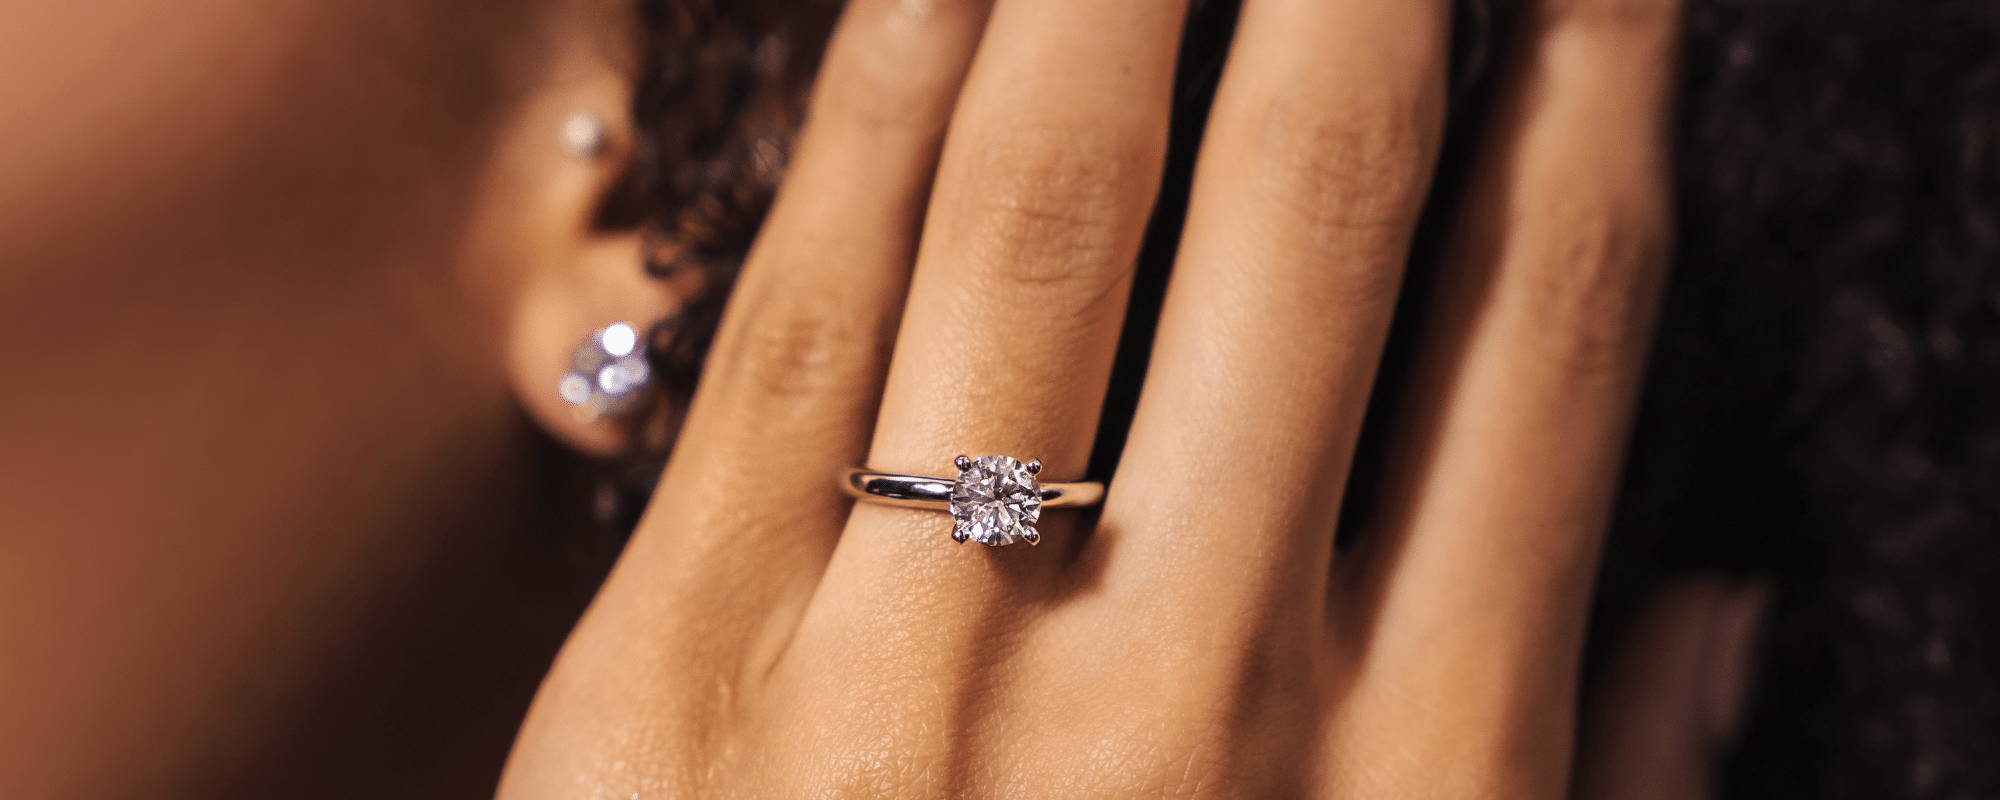 Best Engagement Rings Under 1000 USD